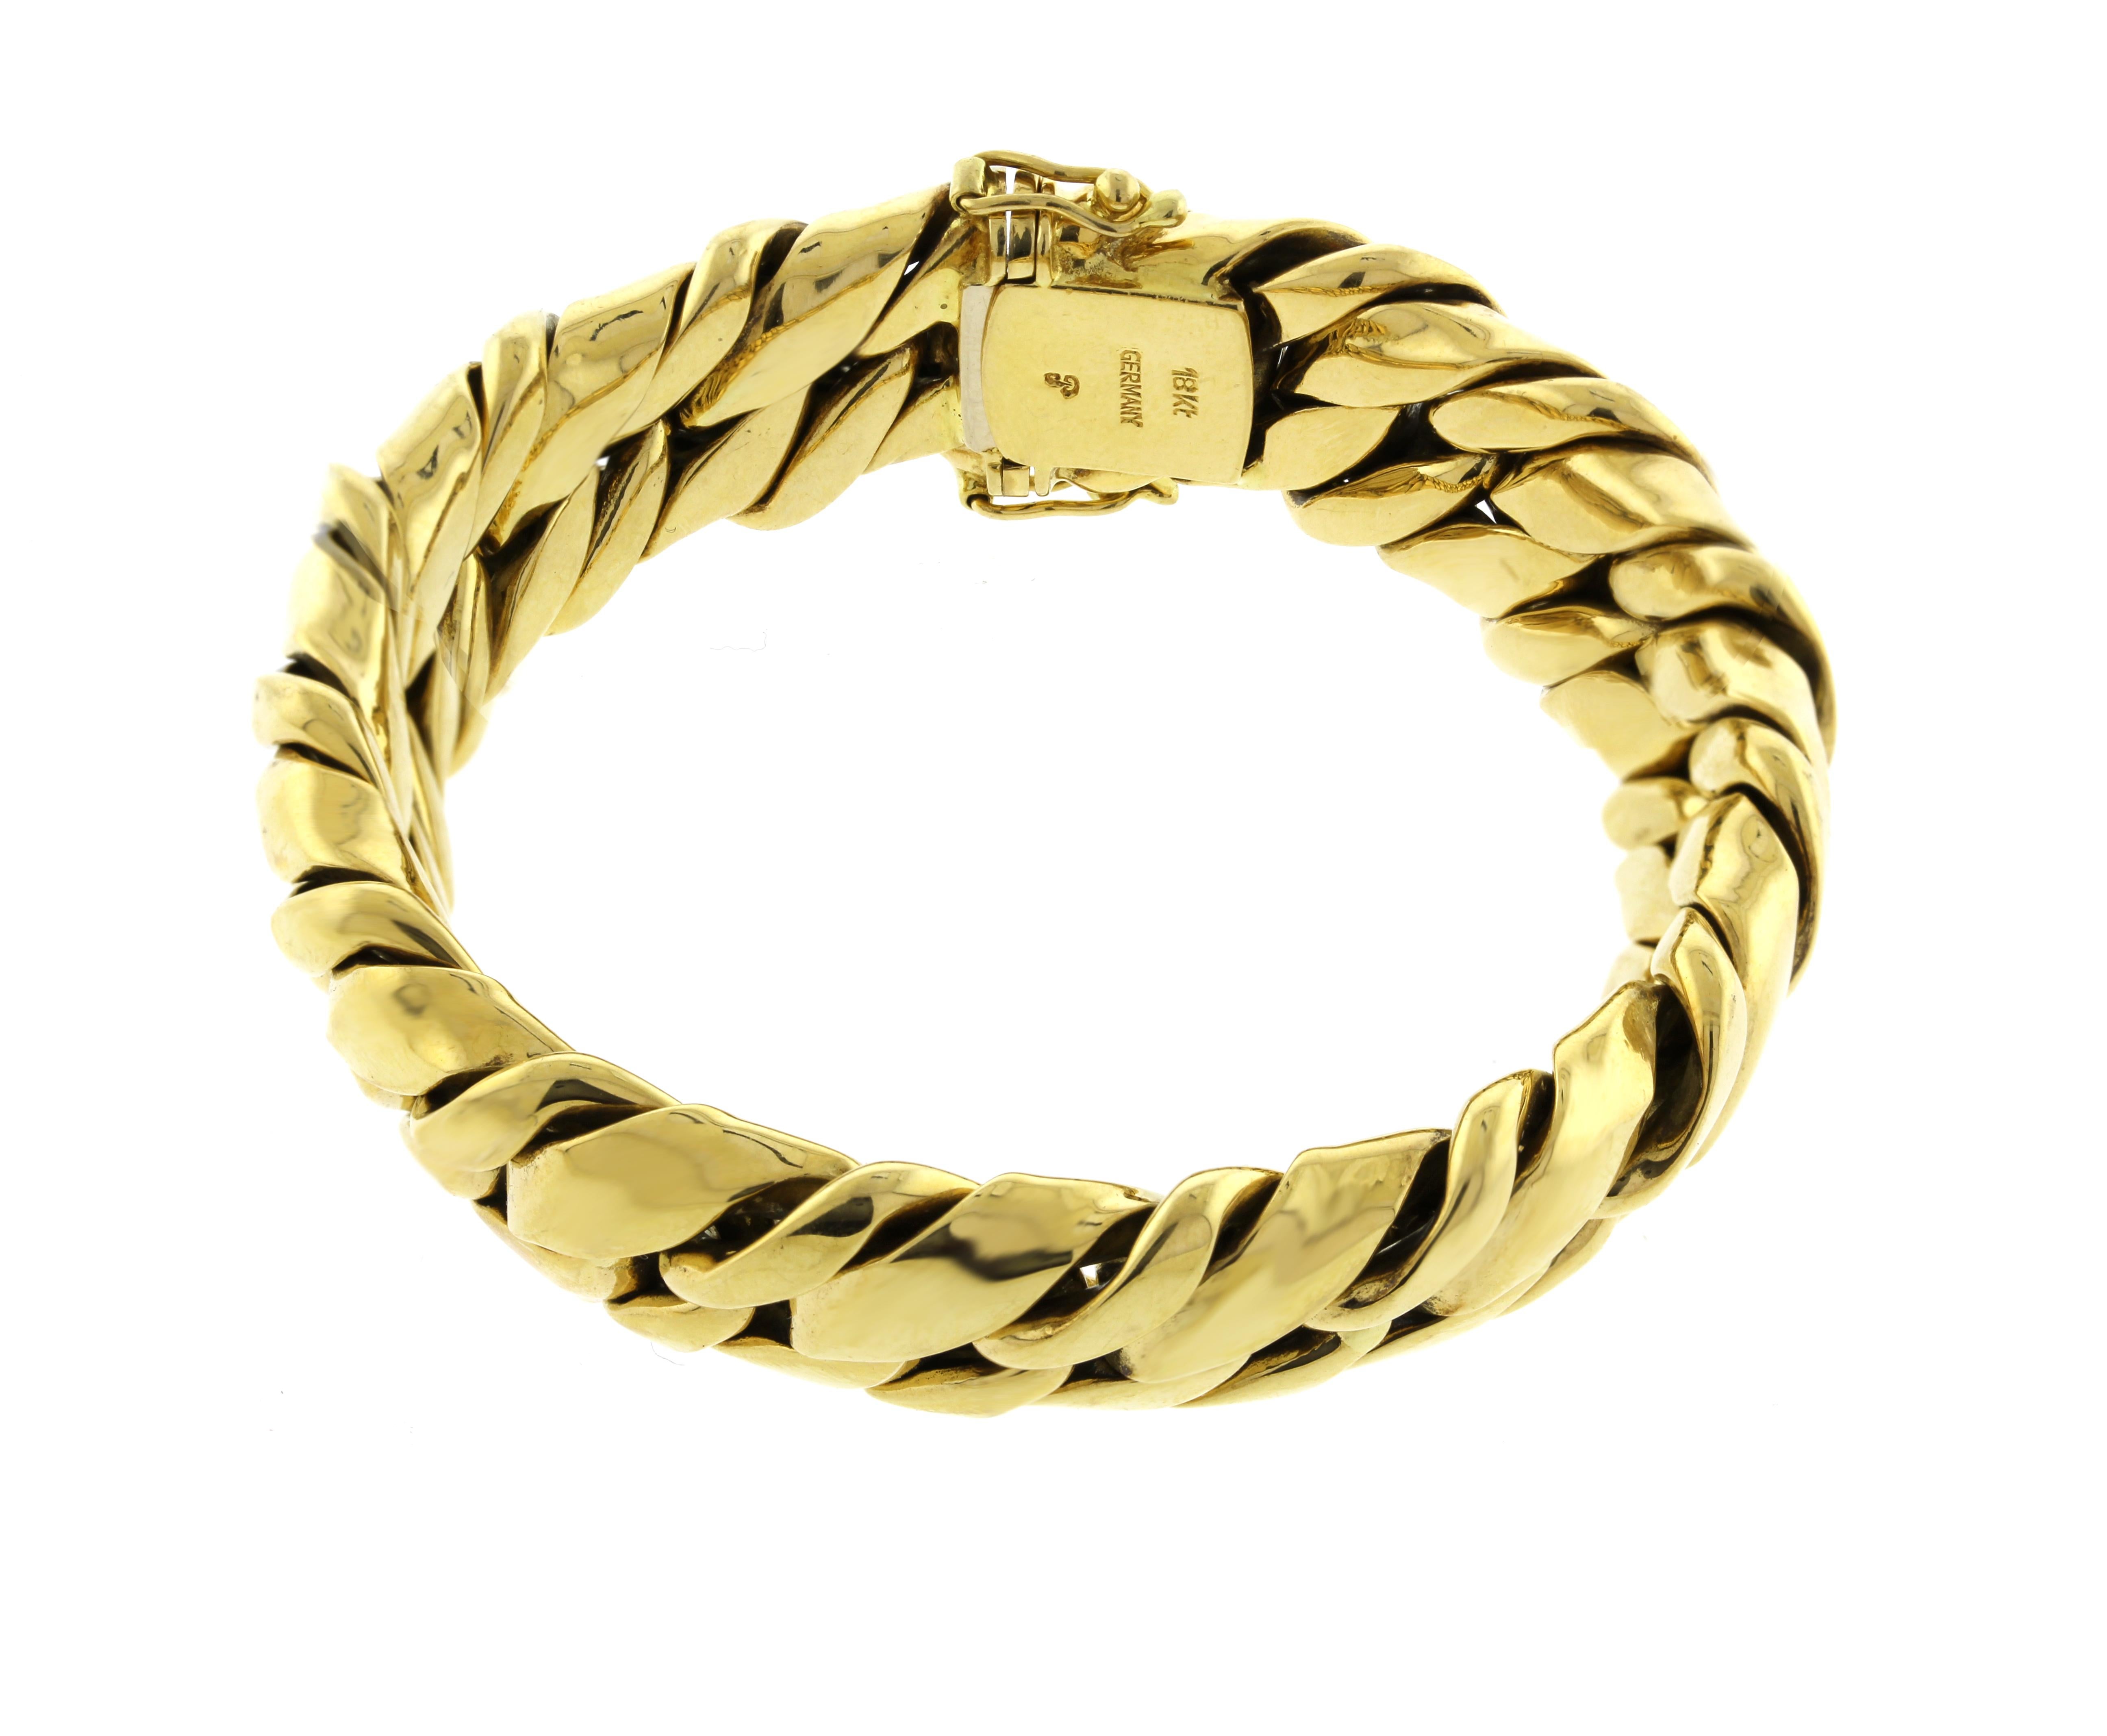 Women's or Men's 18kt Gold Woven Bracelet Made by Abel & Zimmerman for Pampillonia Jewelers For Sale